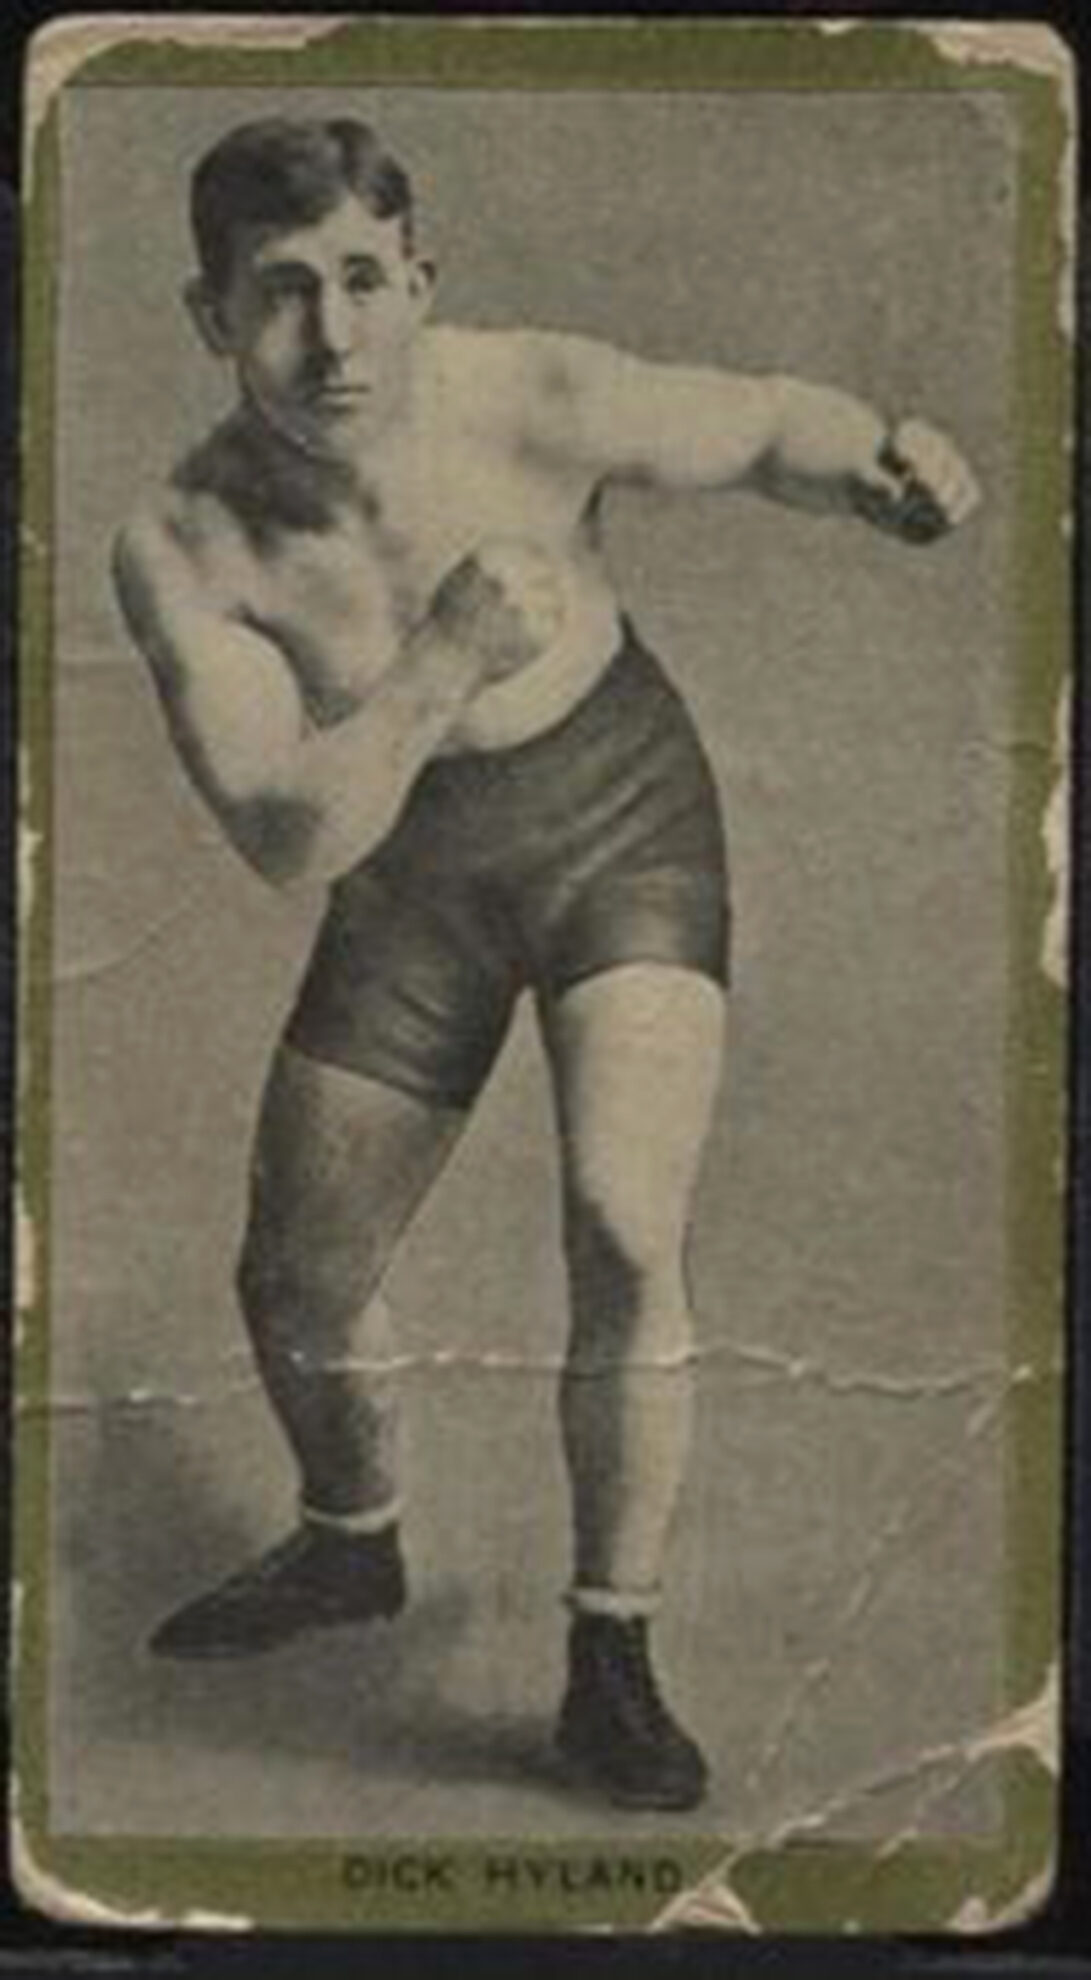 Antique card of the real Fighting Dick Hyland, first decade of the 1900